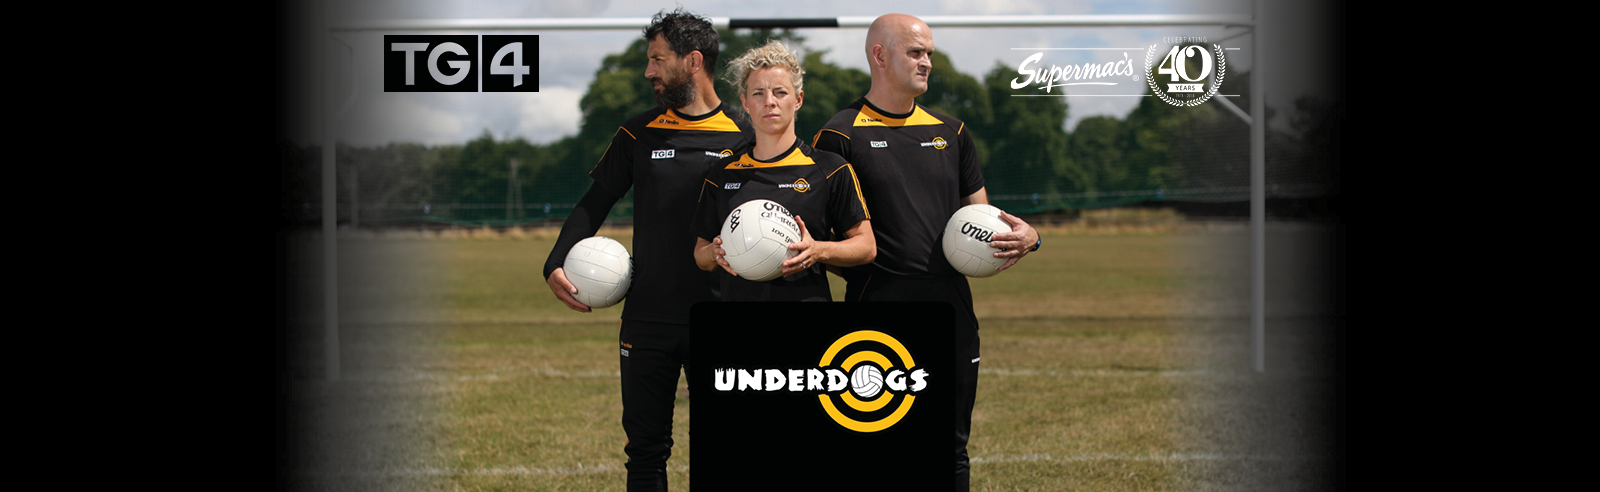 Supermac’s to sponsor TG4’s Underdogs